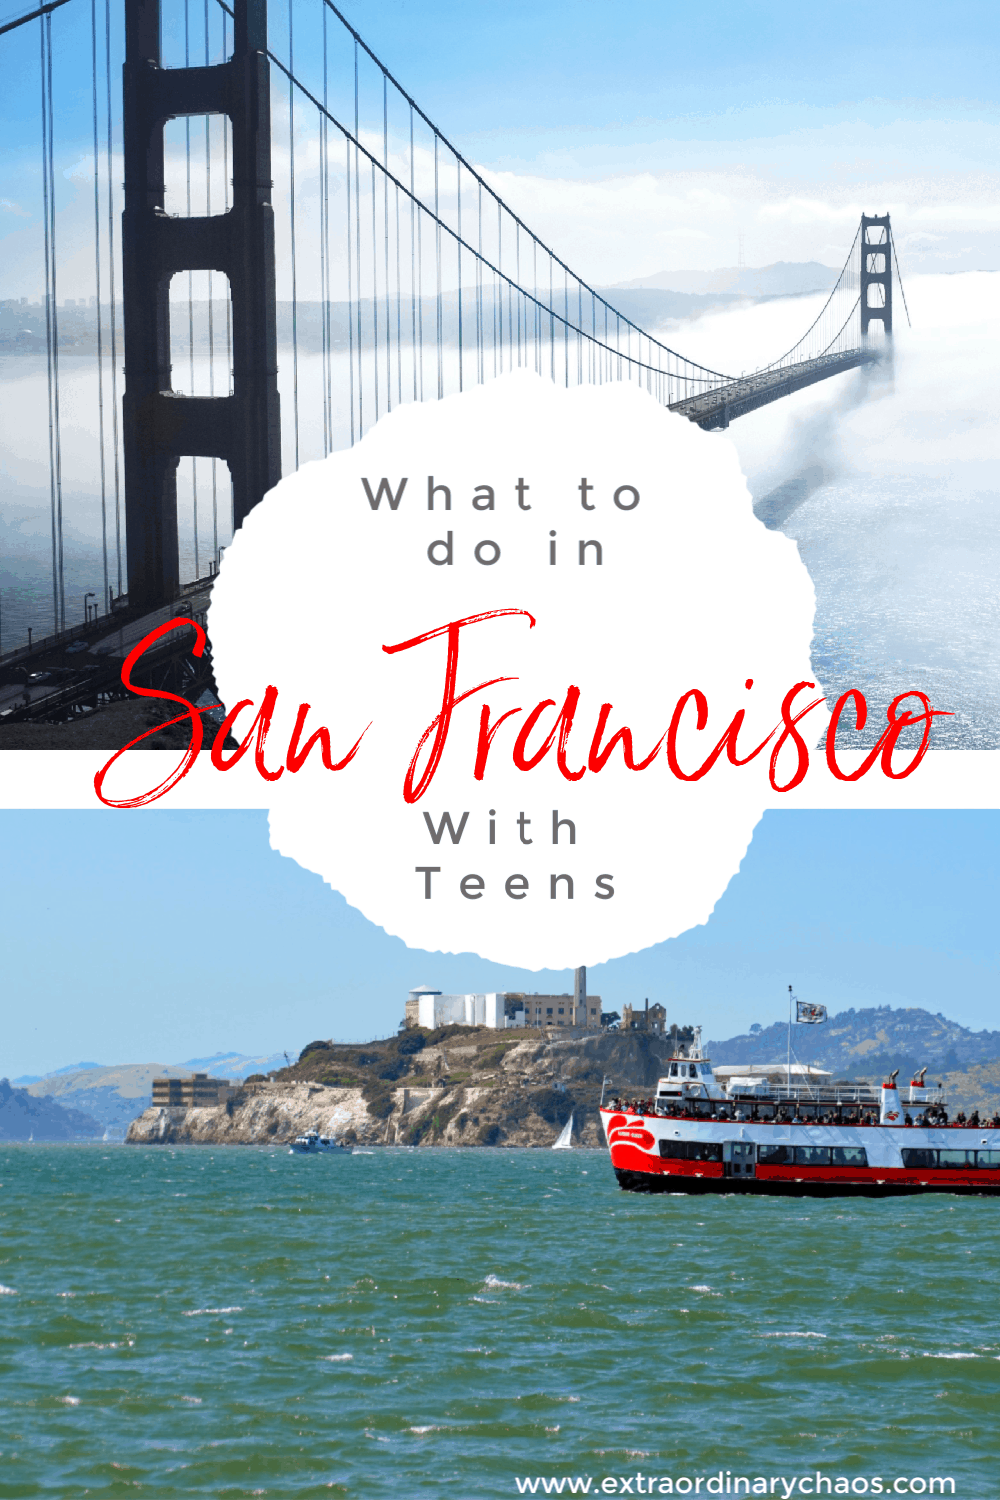 What to do in San Francisco with Teenagers